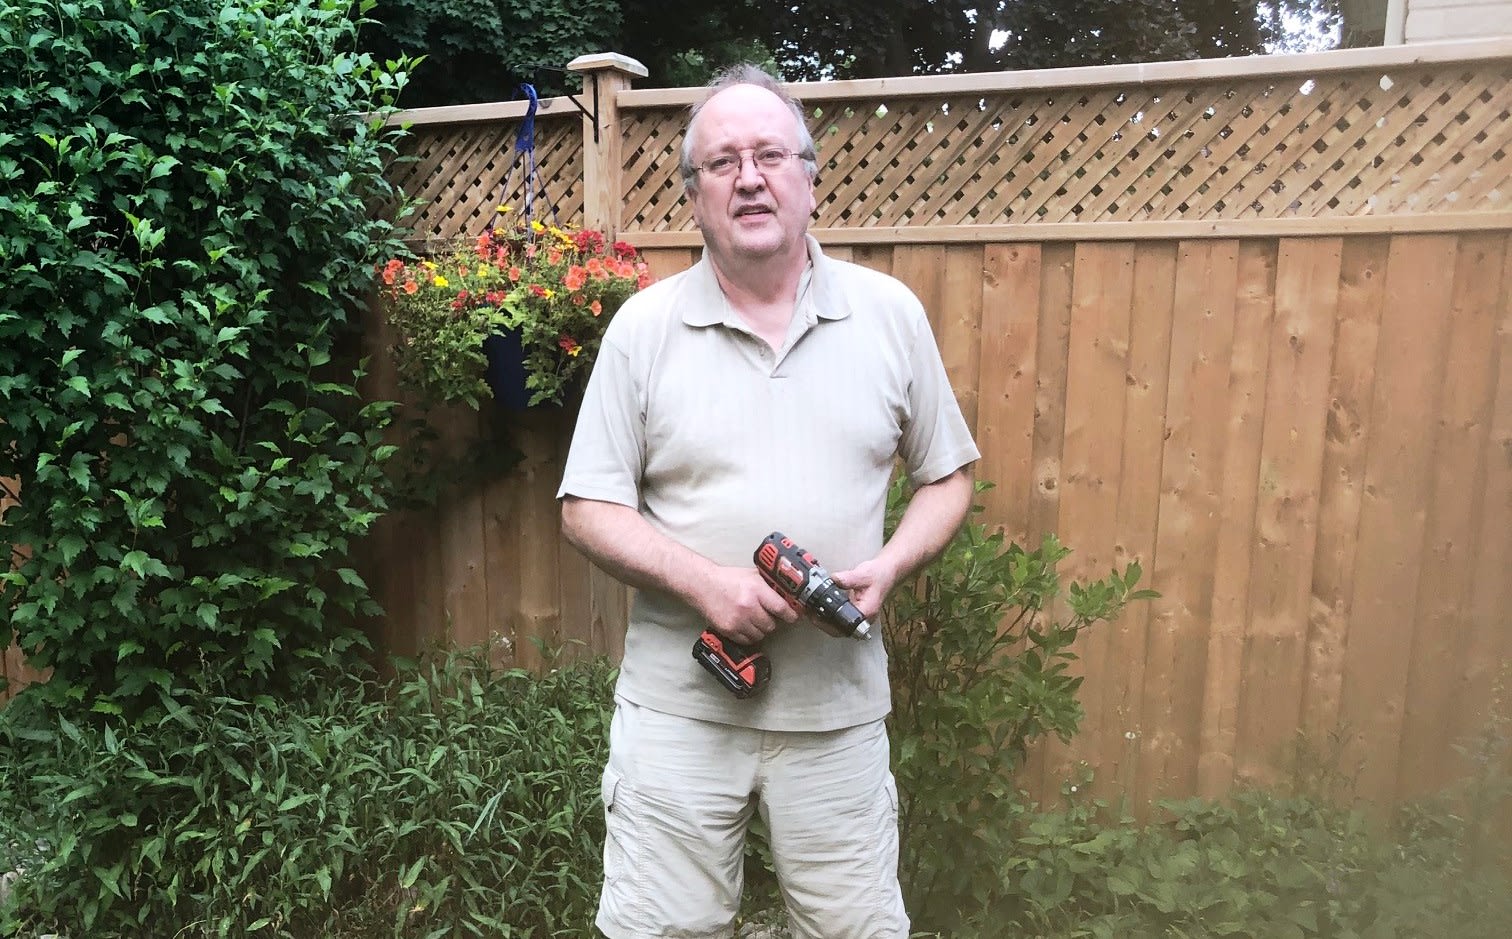 Chris standing in his backyard garden holding a drill